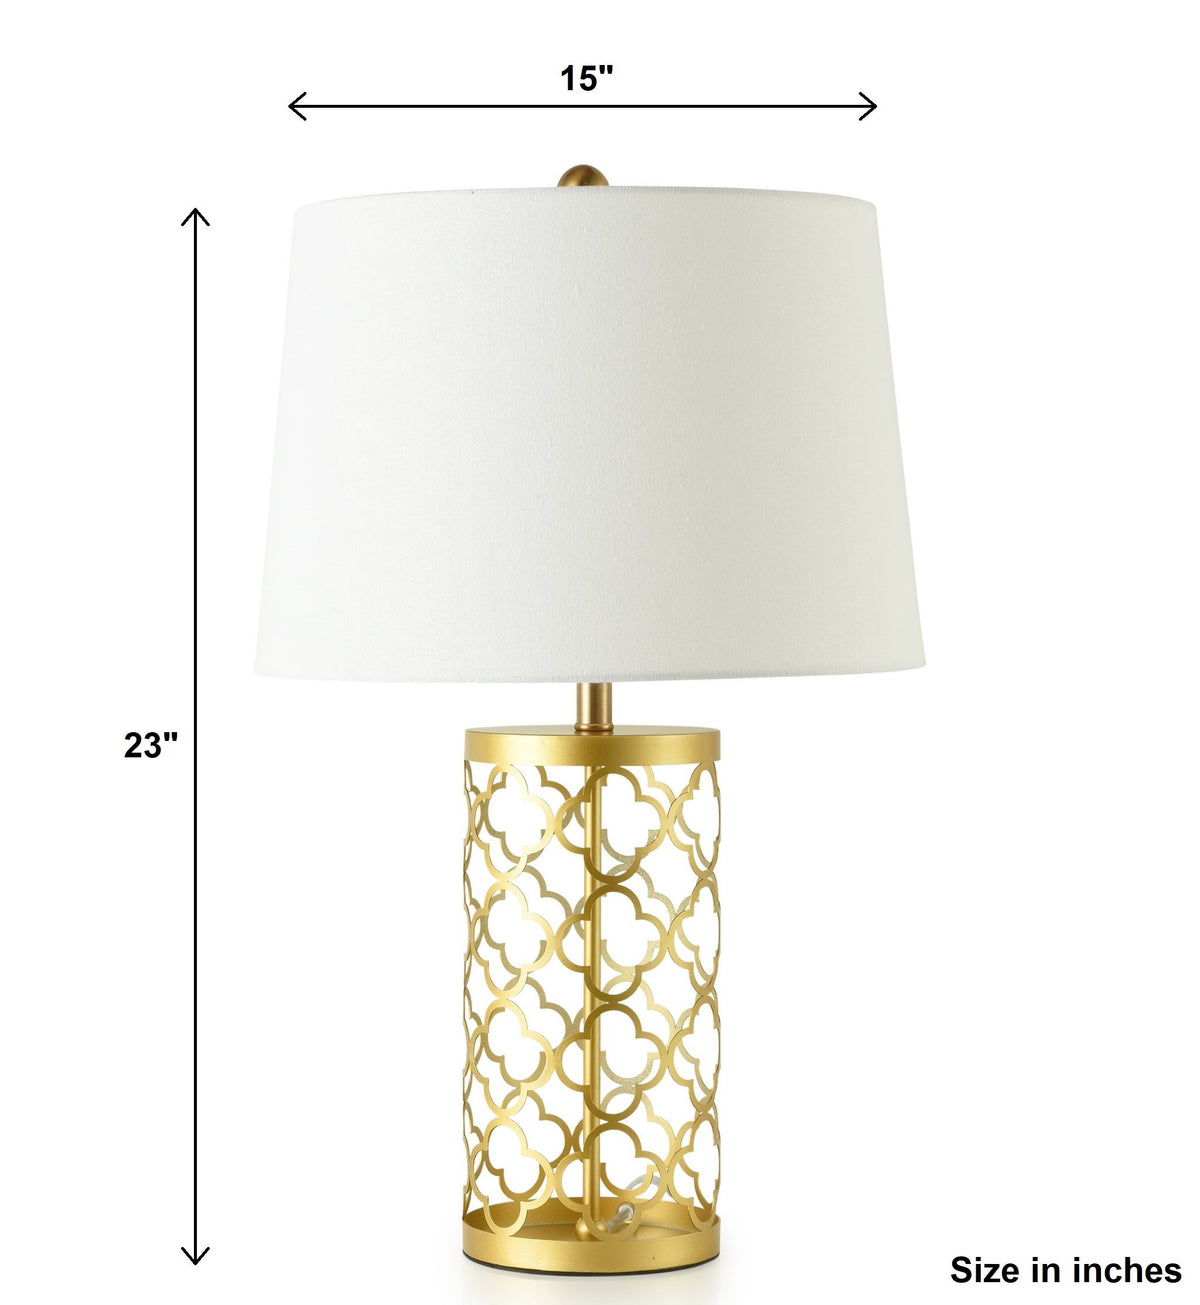 Gold Ring Table Lamp Bangalore Online